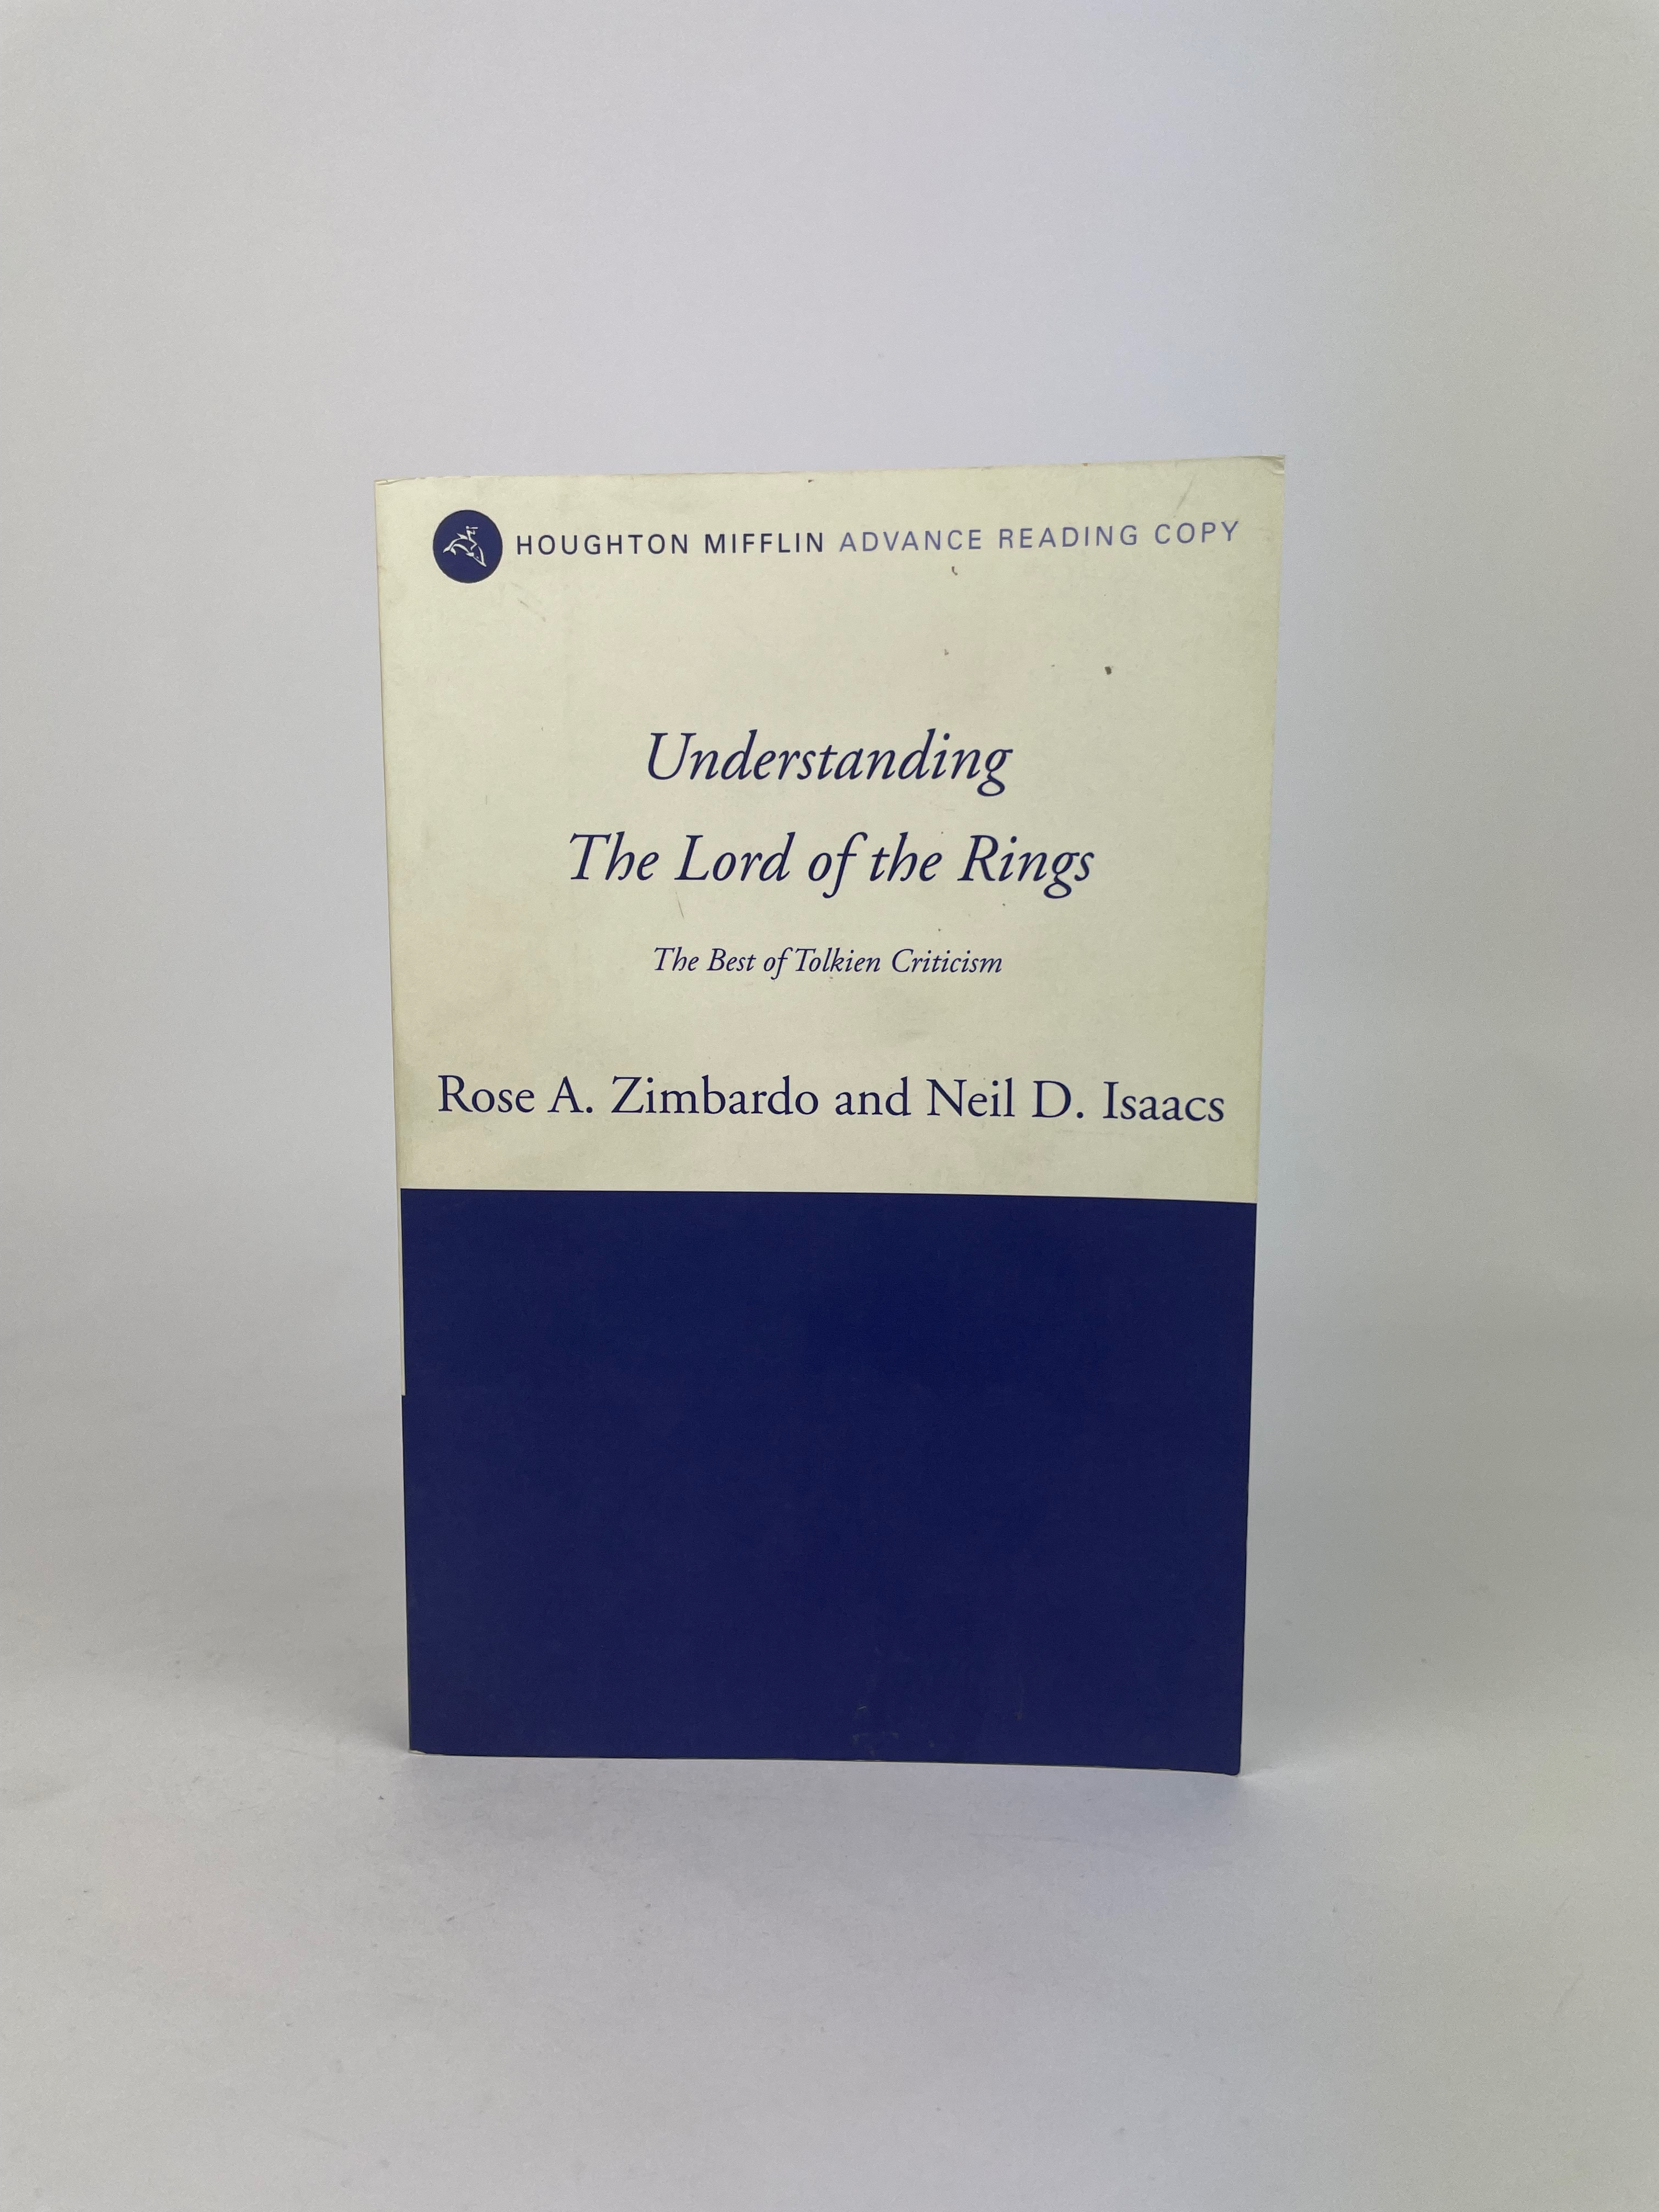 Understanding The Lord of the Rings Uncorrected Proof US 2004 1